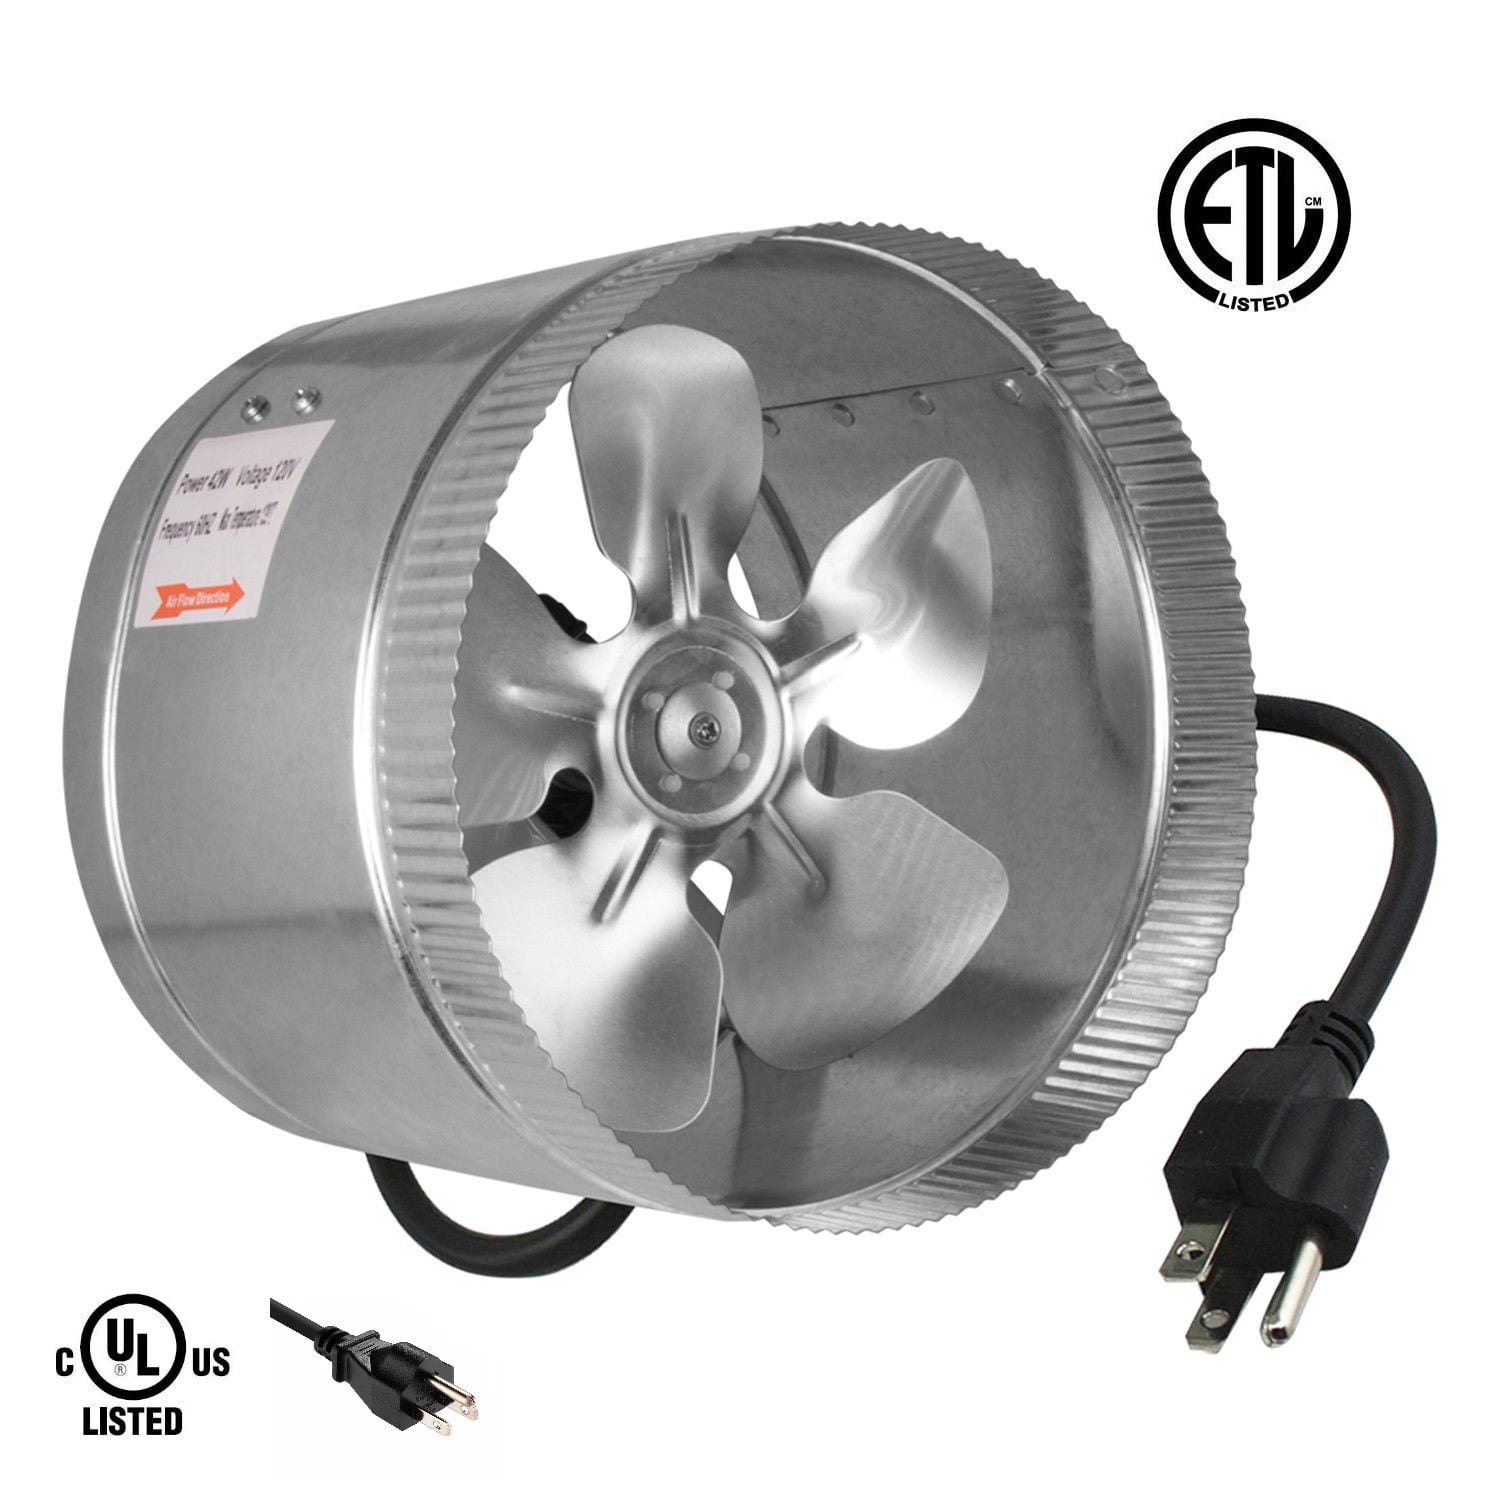 iPower ETL Certified Booster Fan Inline Exhaust Blower for Ducting Vent Cooling